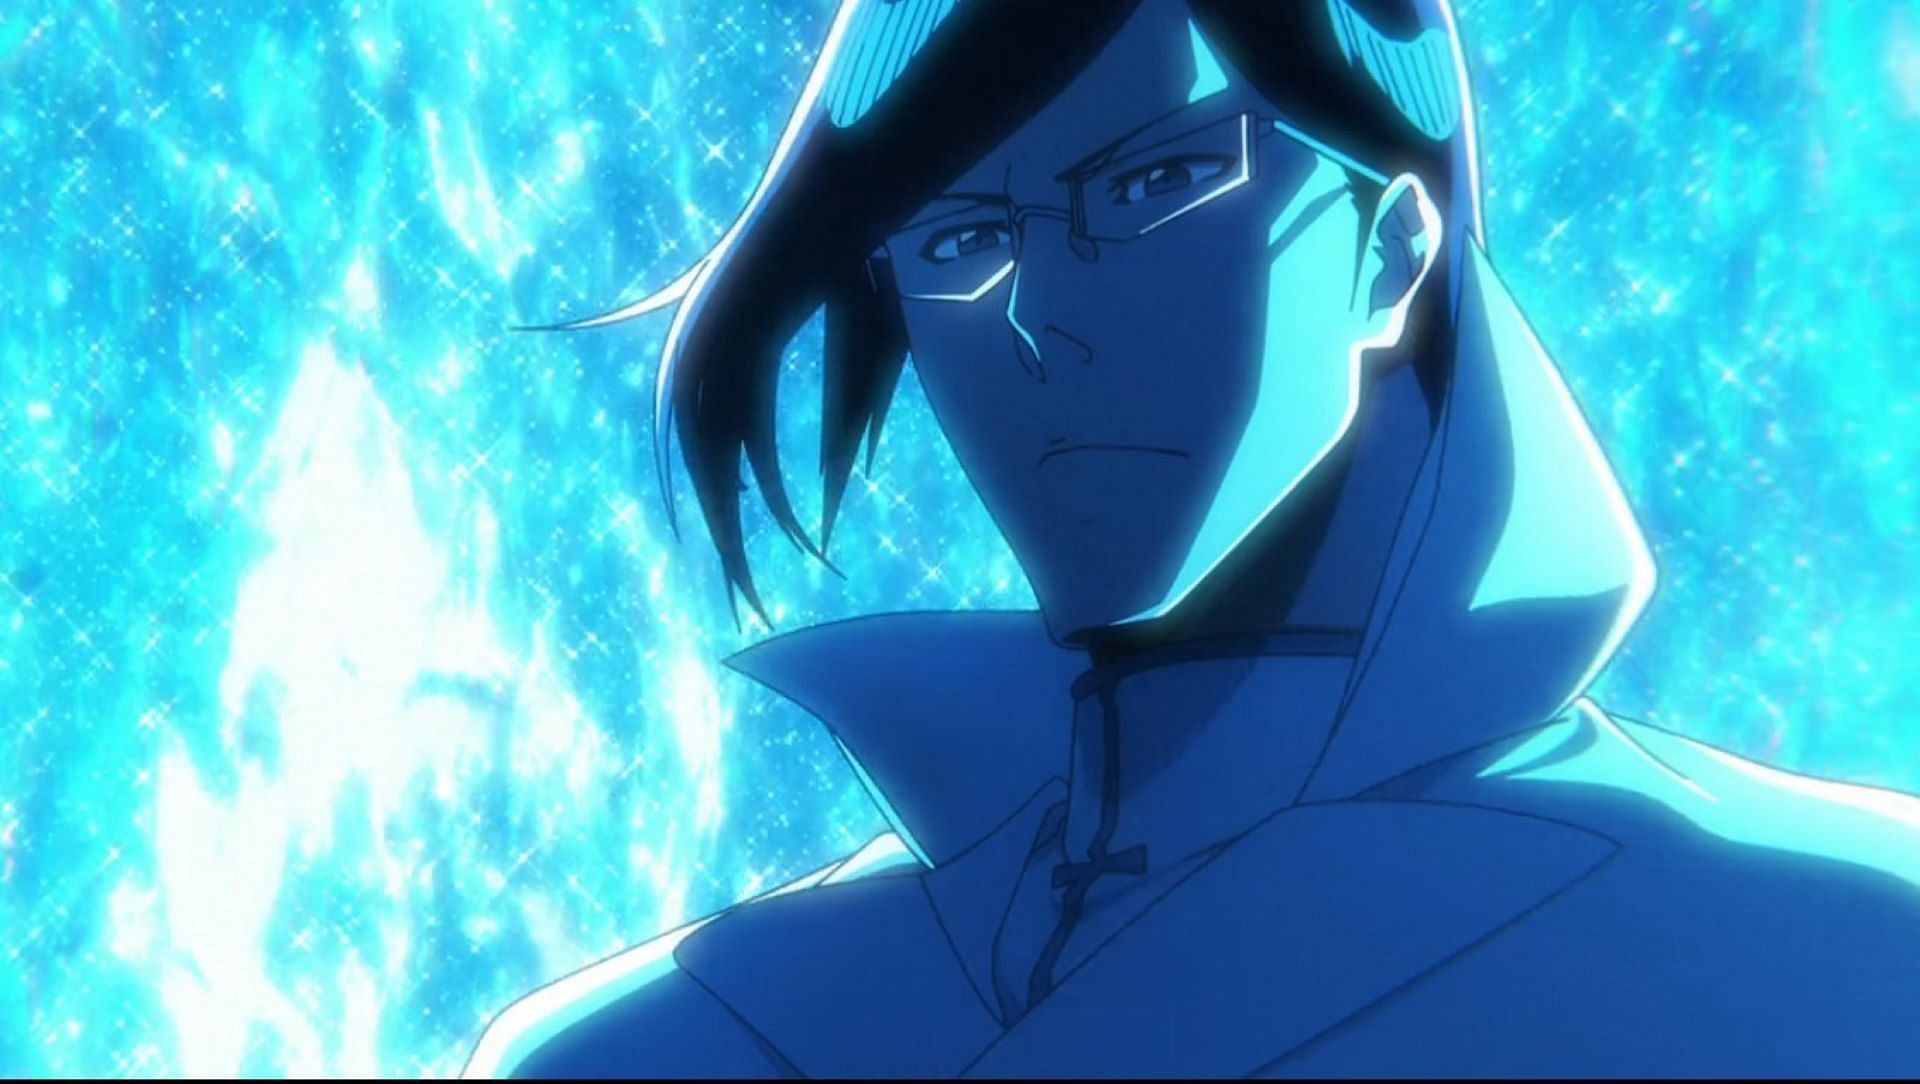 Bleach Star Explains Why Uryu is Unique in New Anime